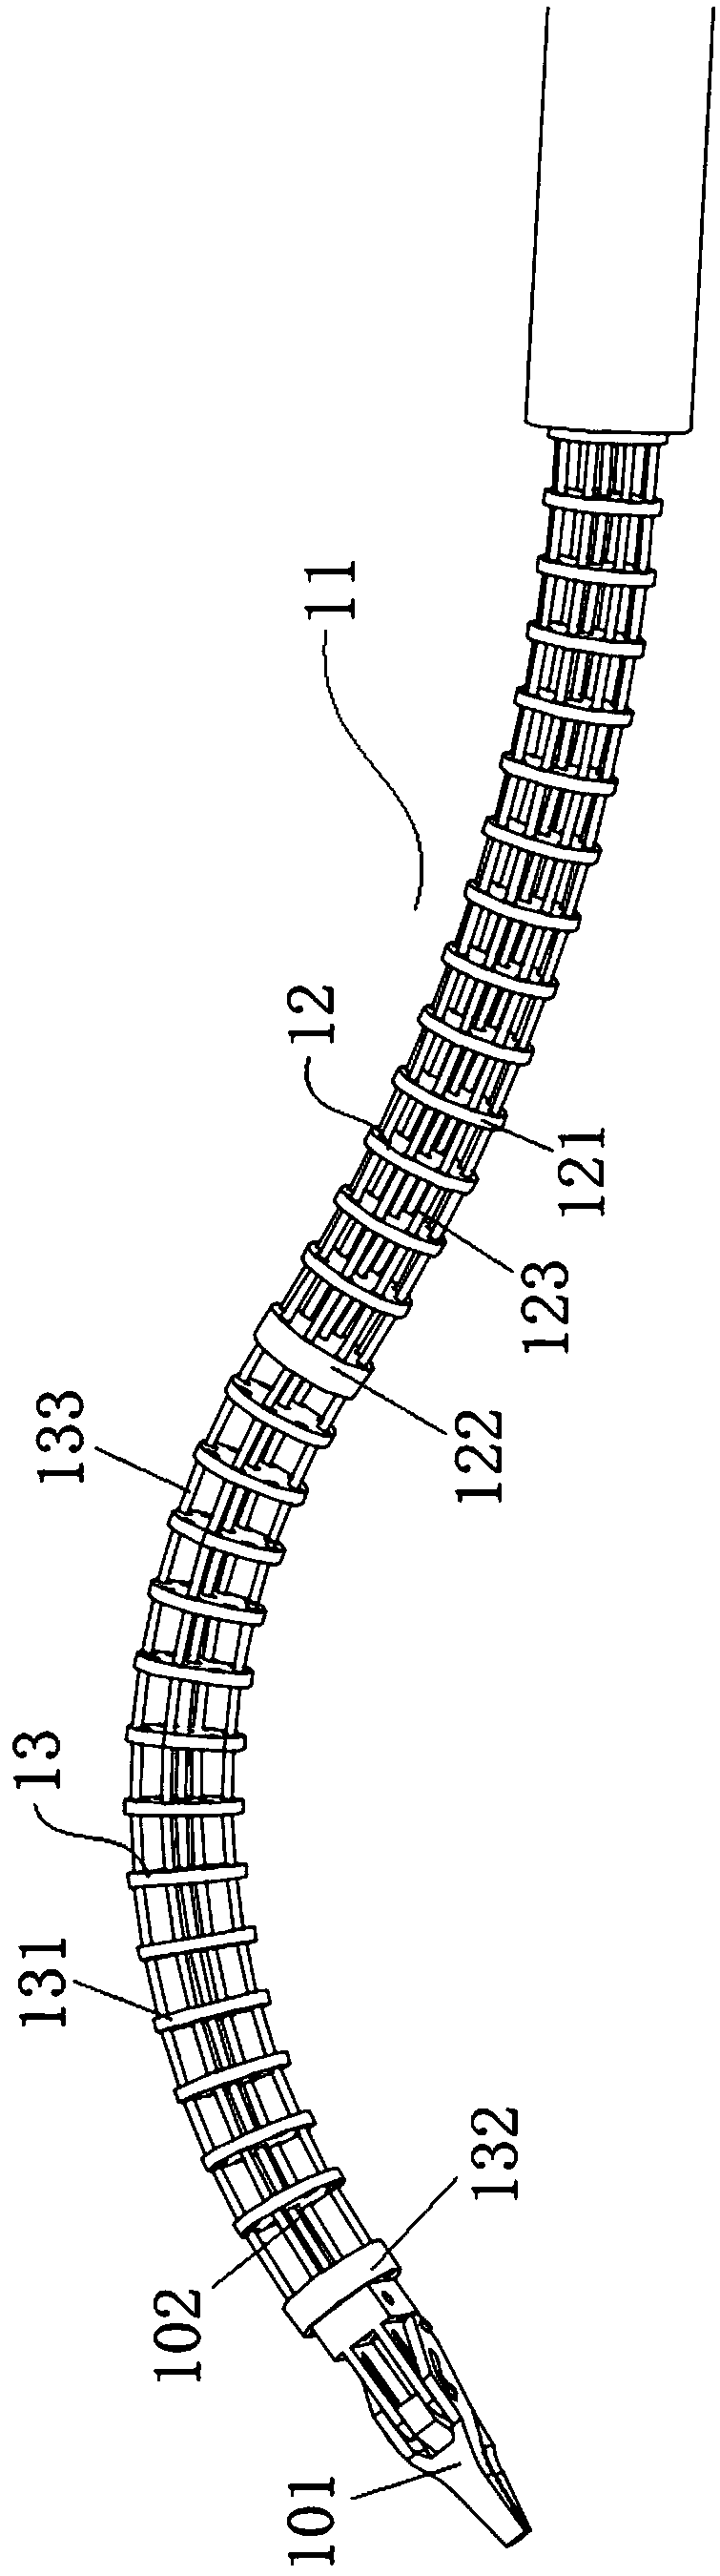 A Flexible Surgical Tool with Structural Bone Opposite Cross Arrangement